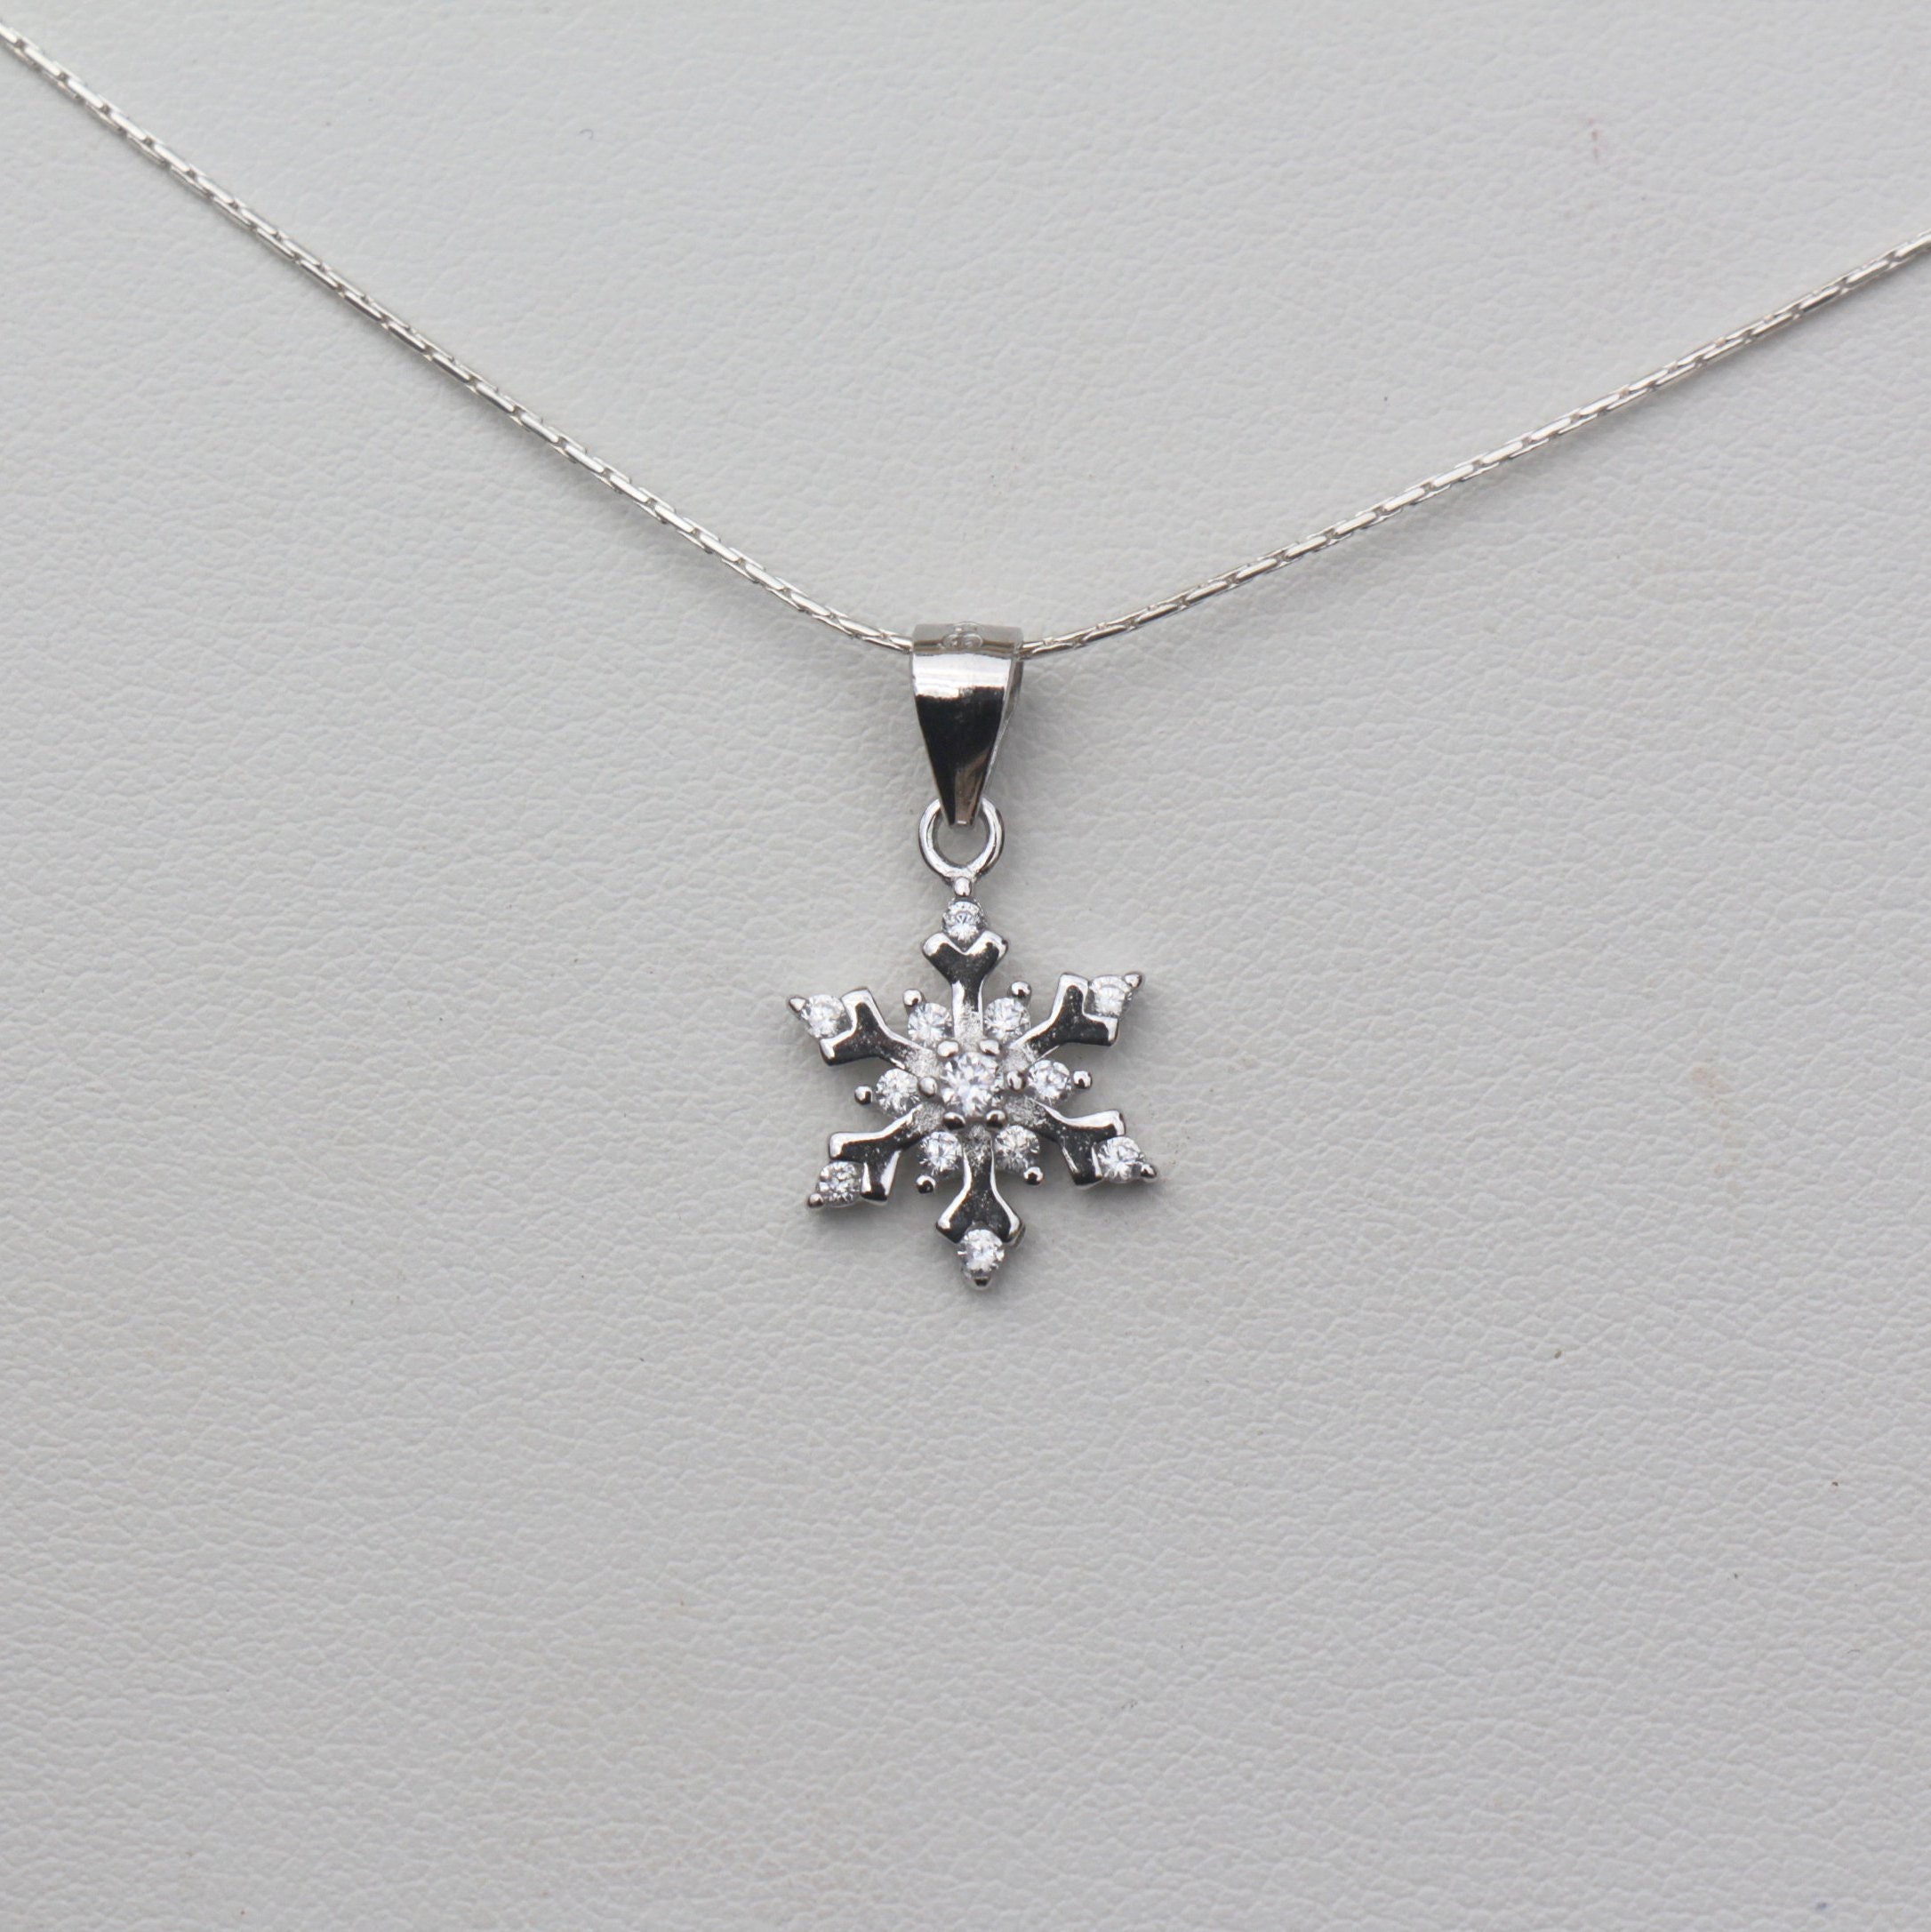 Snowflake Necklace 925 Sterling Silver Clear Zircon Stone | Etsy